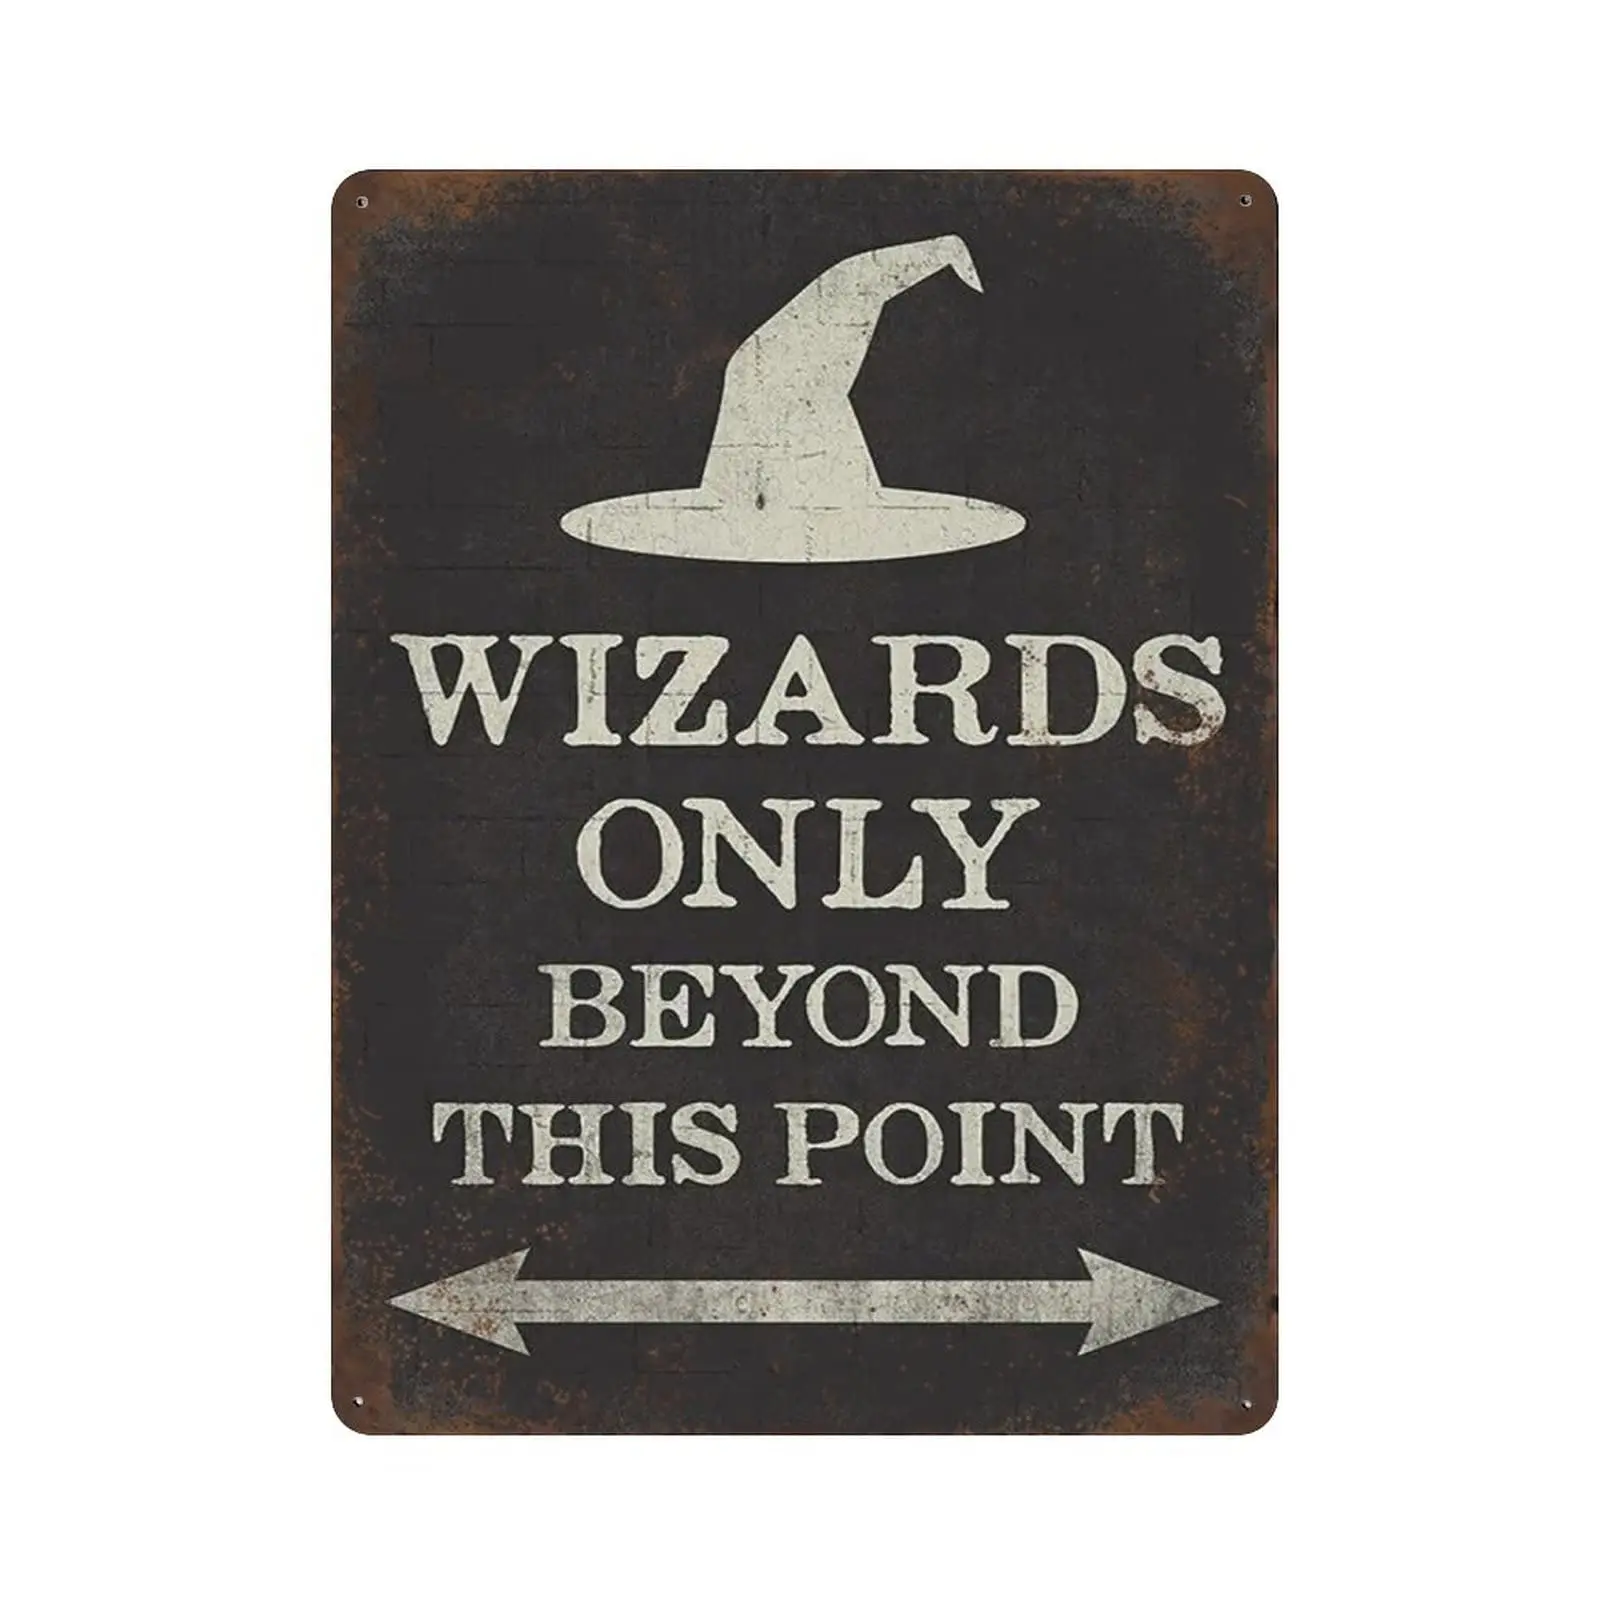 

Retro Style Metal tin sign,Iron Painting,Keep Calm Collection Wizards Only Beyond This Point Tin Sign, Witch Halloween Home Deco